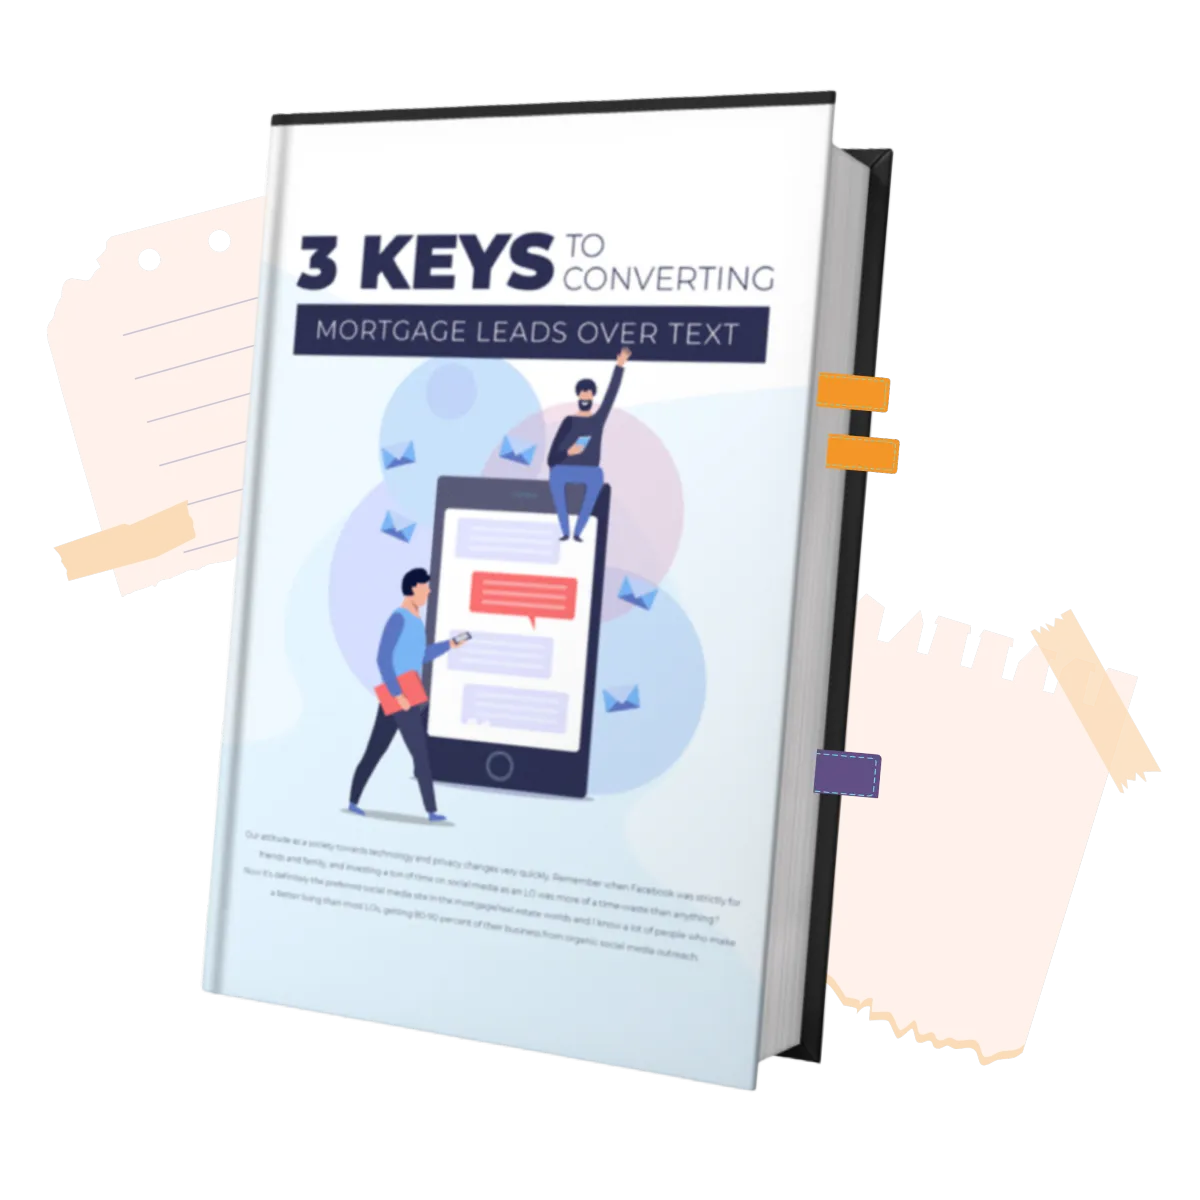 Titled booklet that says 3 Keys to converting mortgage leads over text